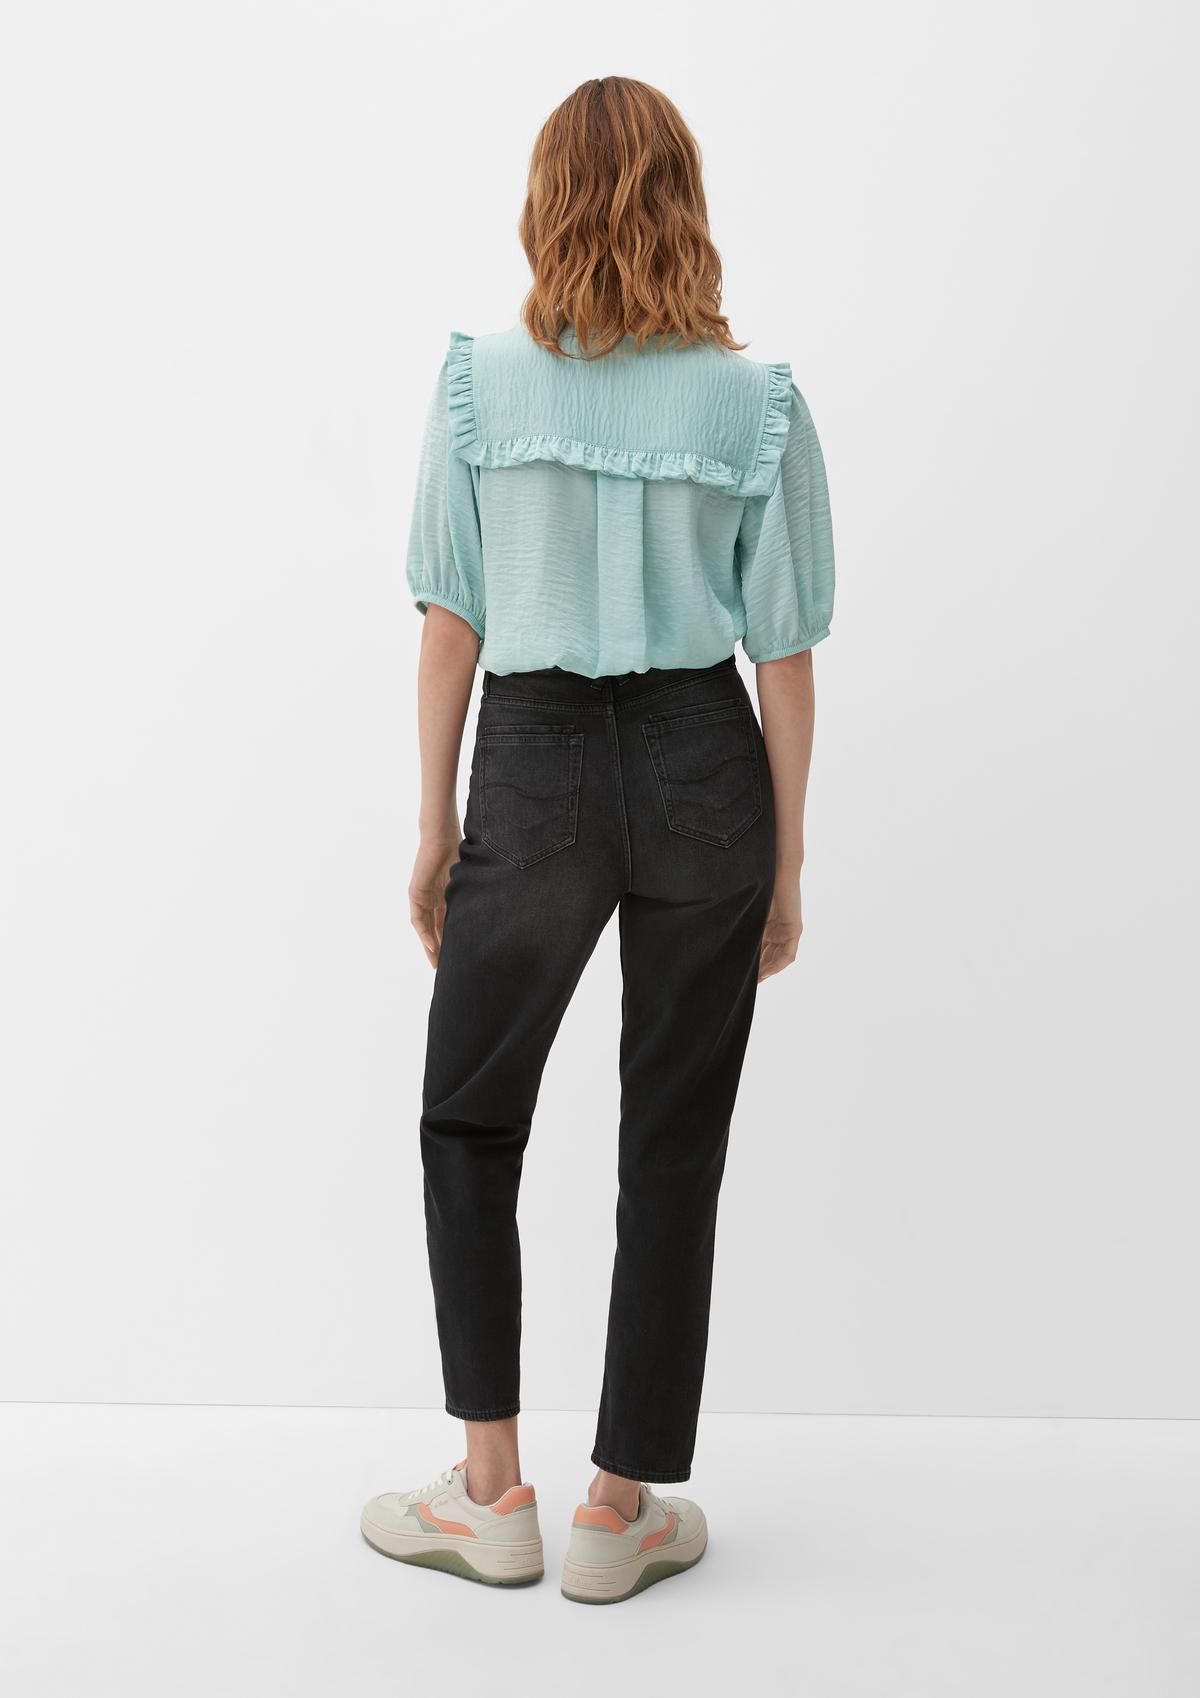 s.Oliver Blouse with frilled details